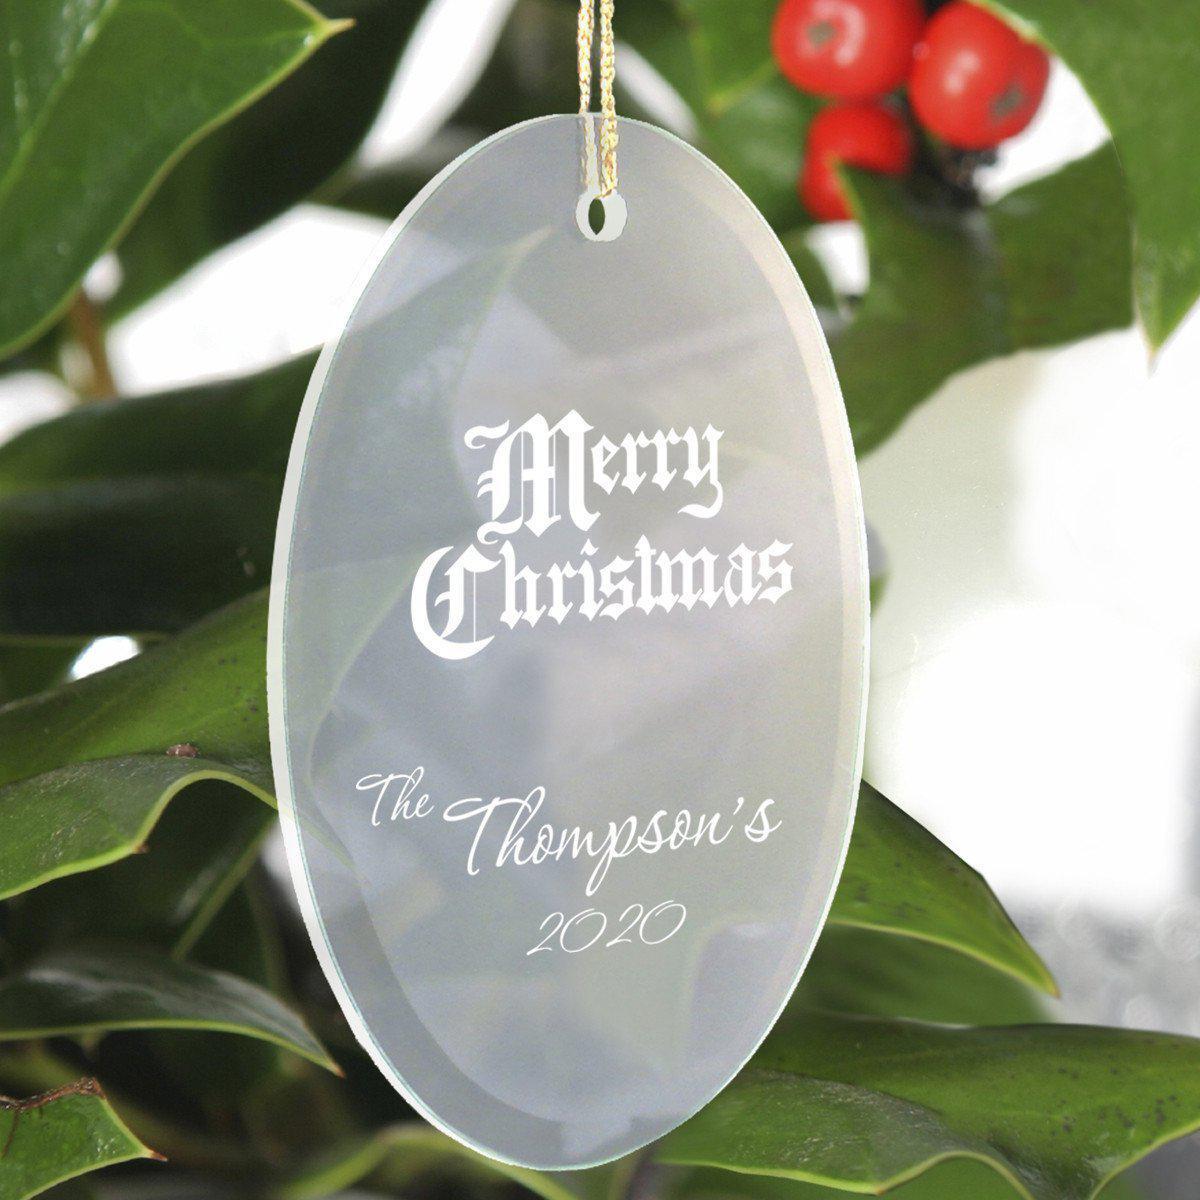 Personalized Beveled Glass Ornament - Oval Shape